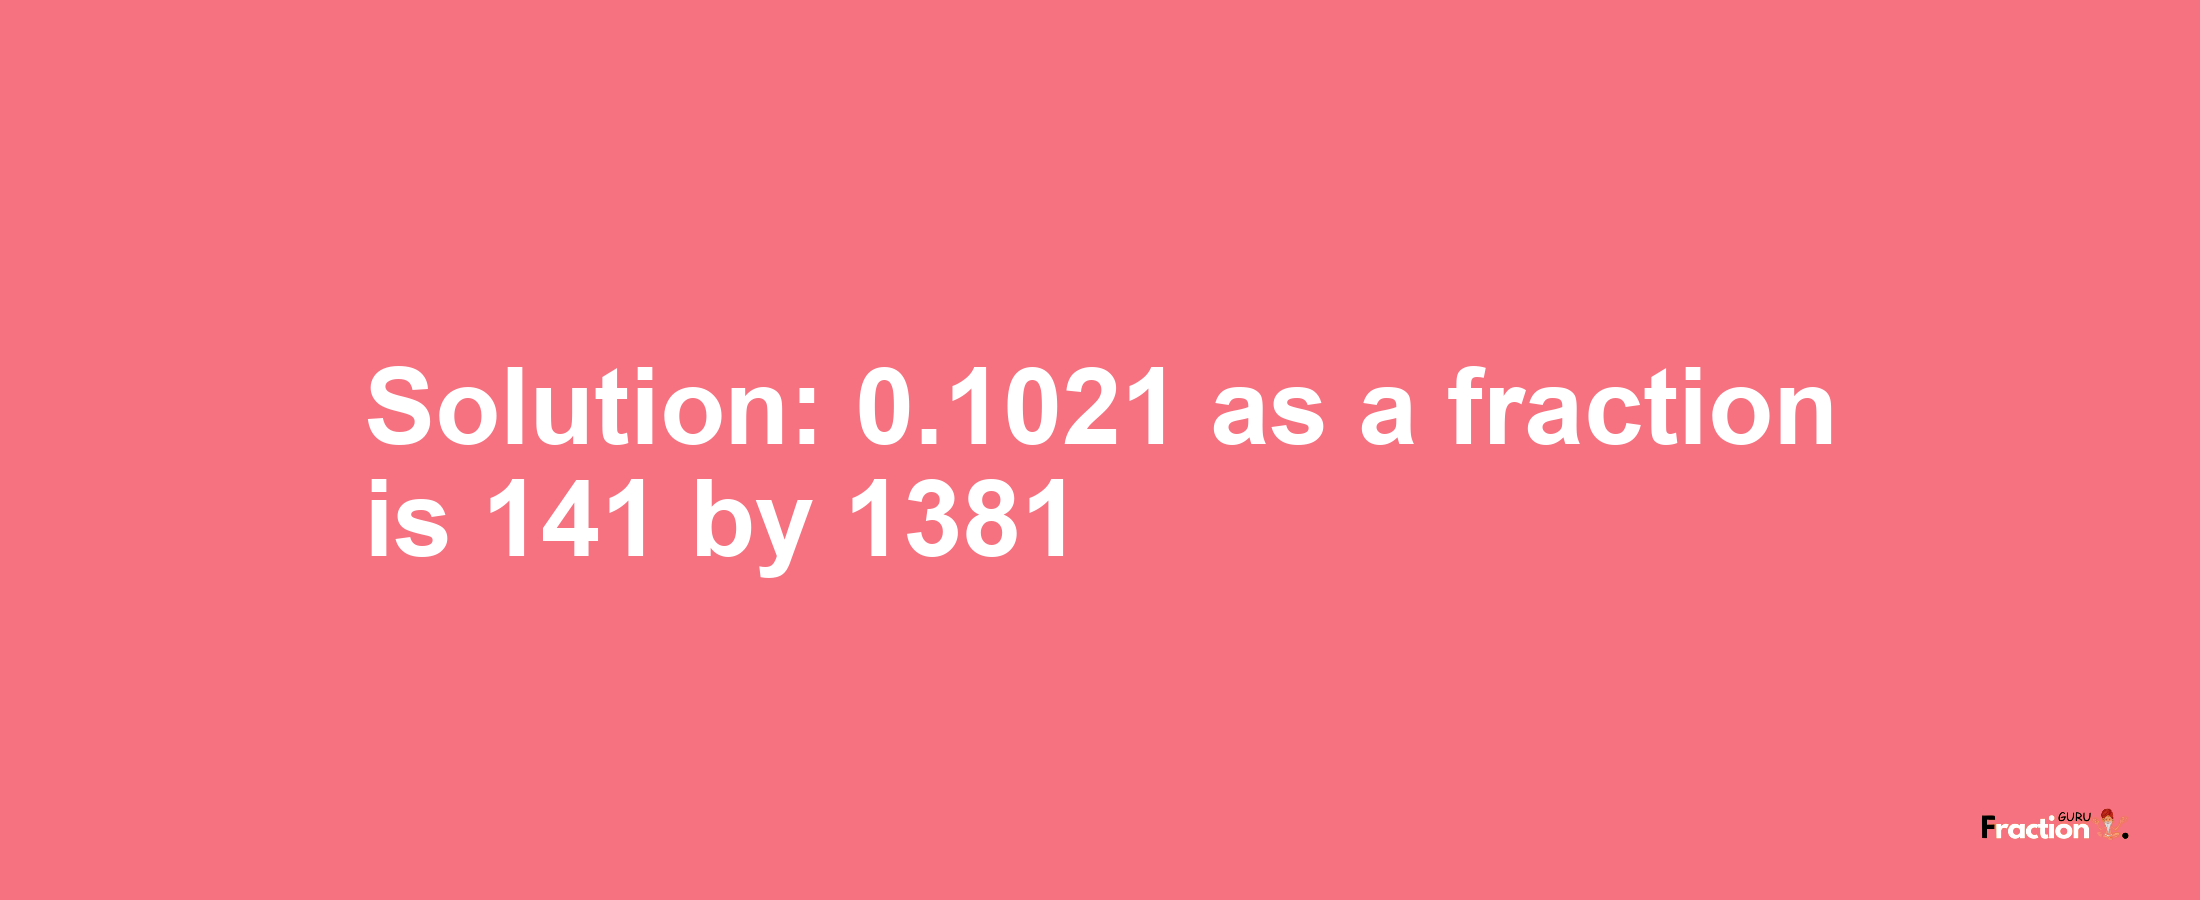 Solution:0.1021 as a fraction is 141/1381